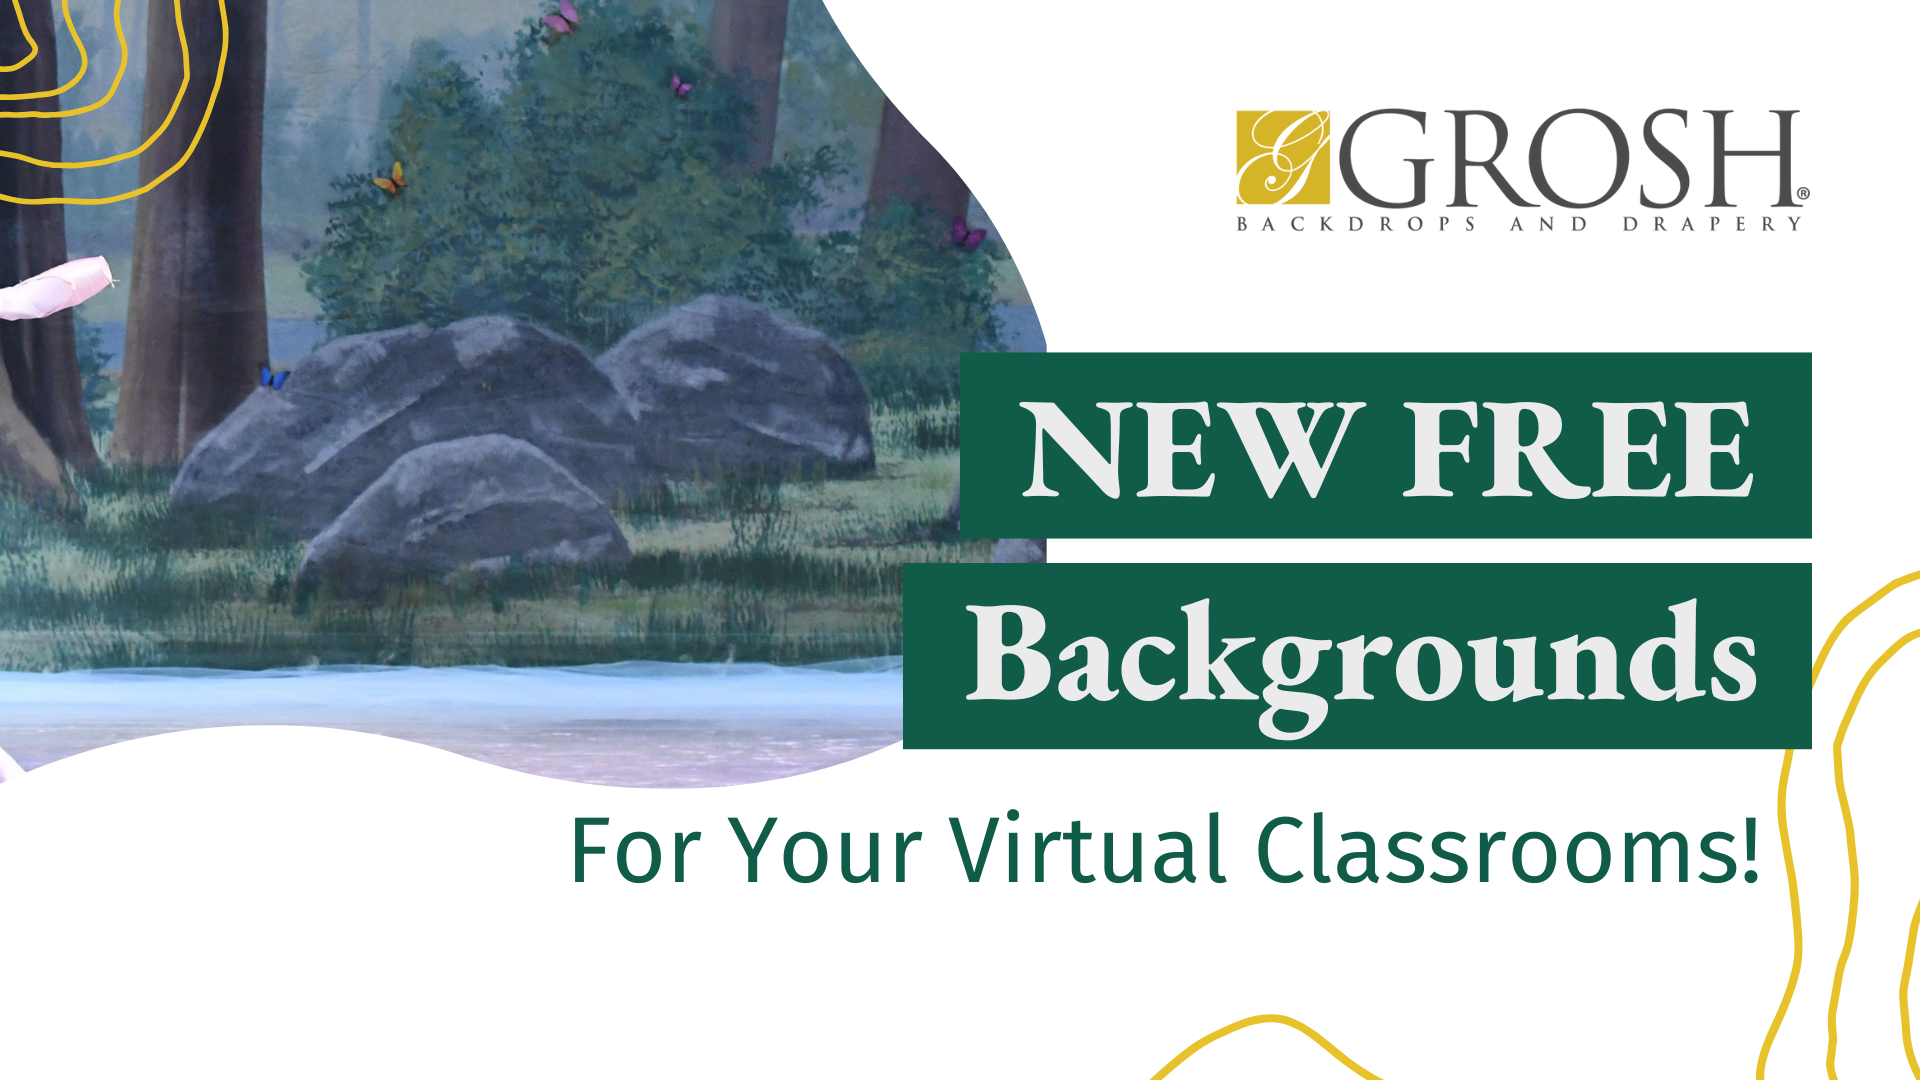 NEW FREE Backgrounds for your Virtual Classrooms